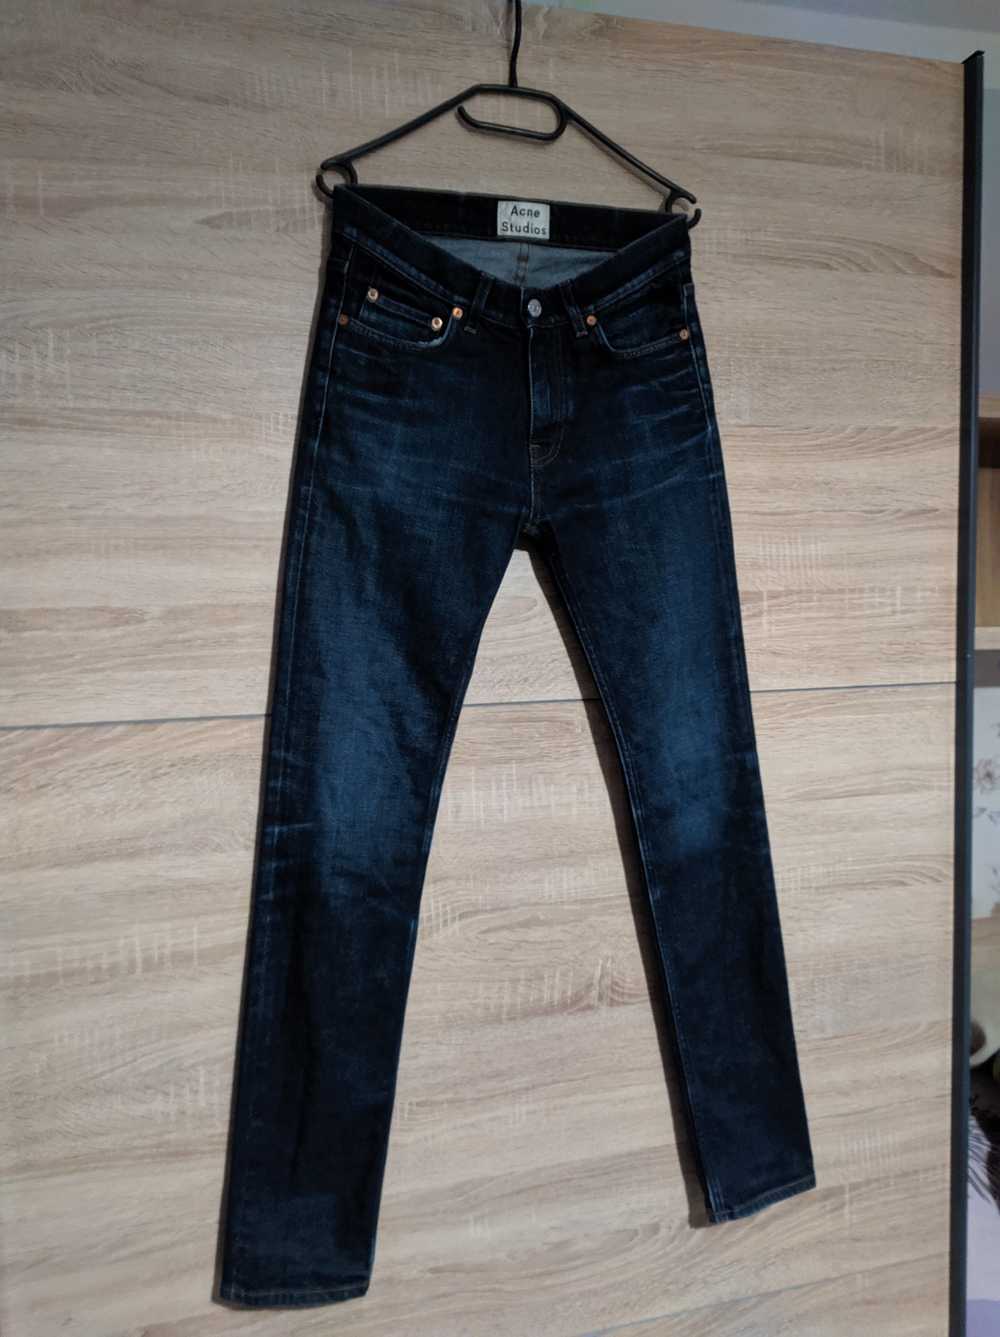 Acne Studios 30% of Retail Acne Ace Two Jeans - image 2